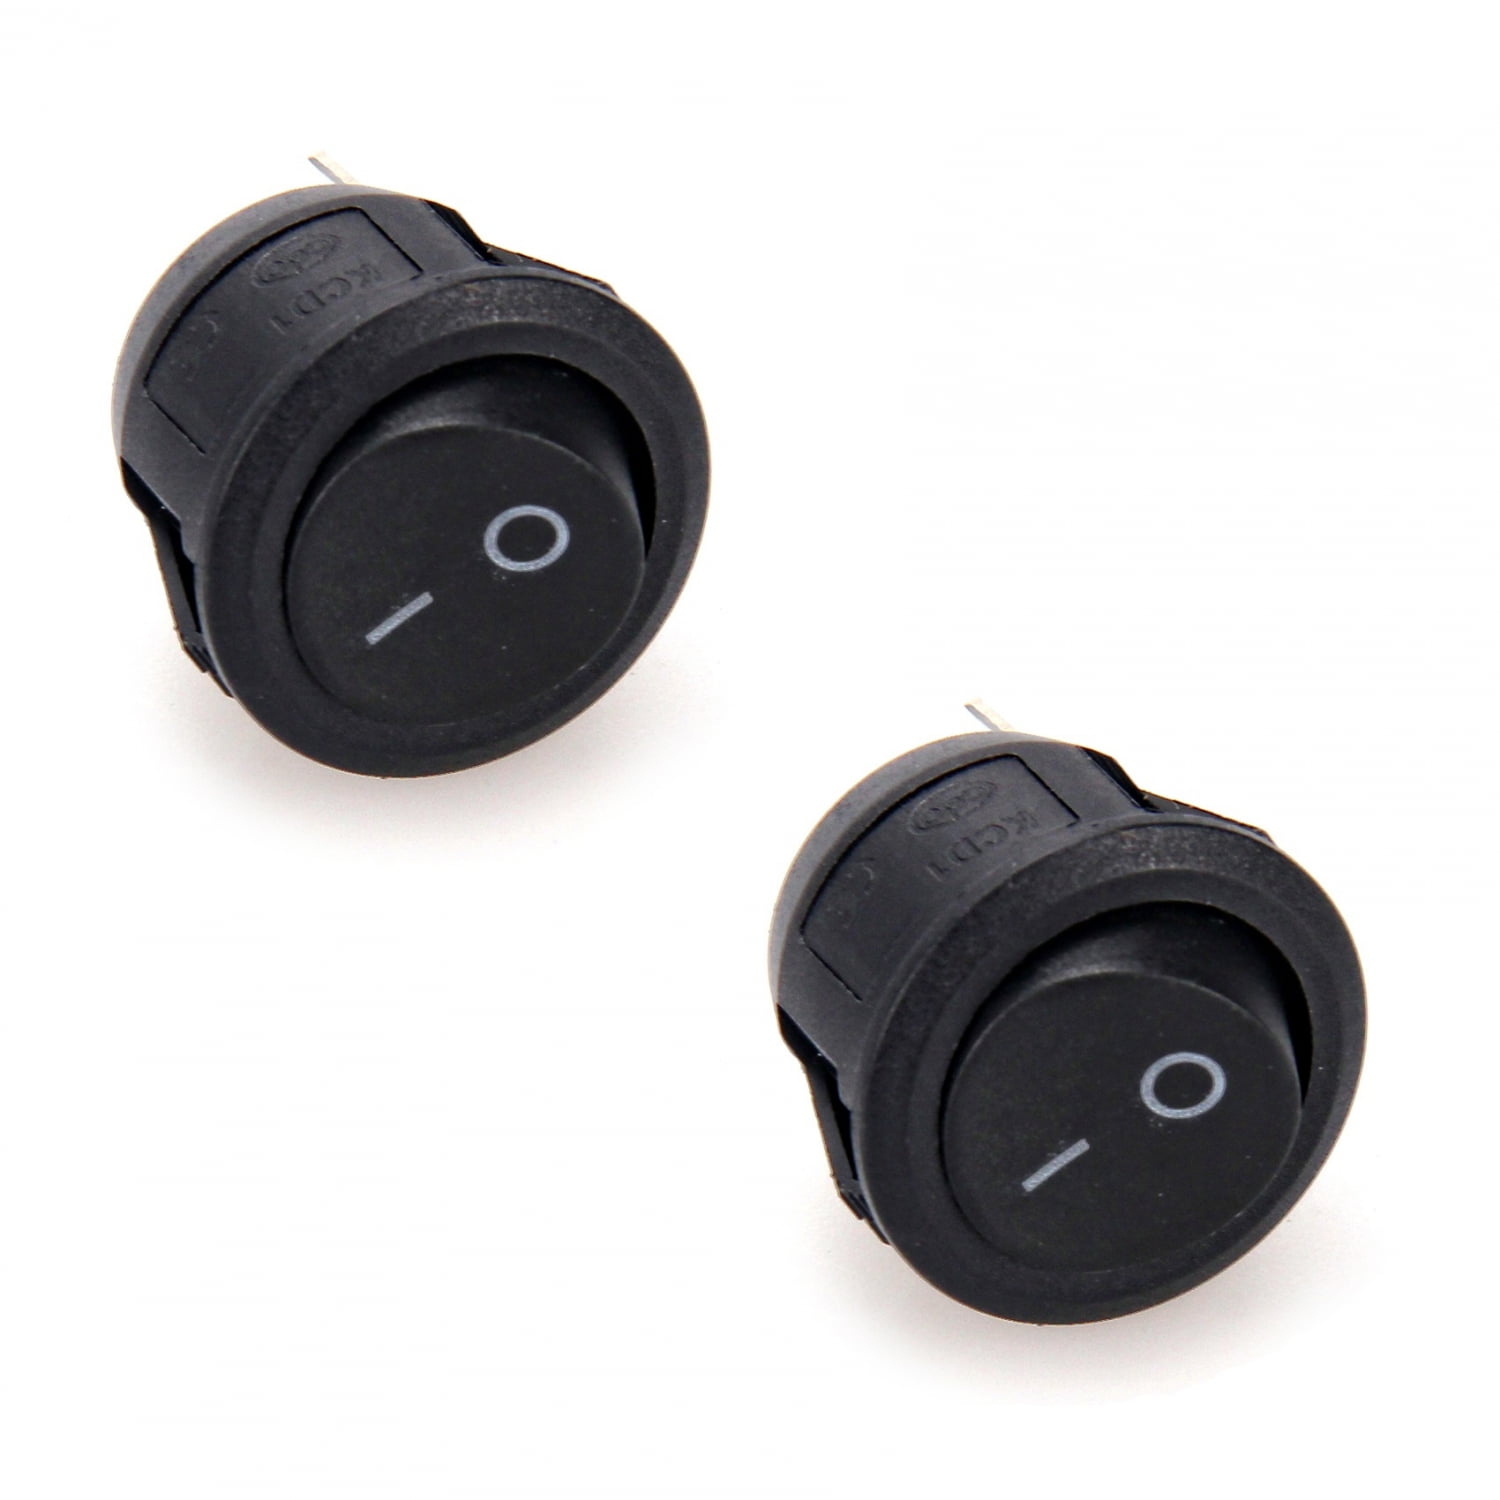 SenRan Car Truck Round Rocker Toggle Switch SPST On-Off Control with Switch Housing Red LED Light 